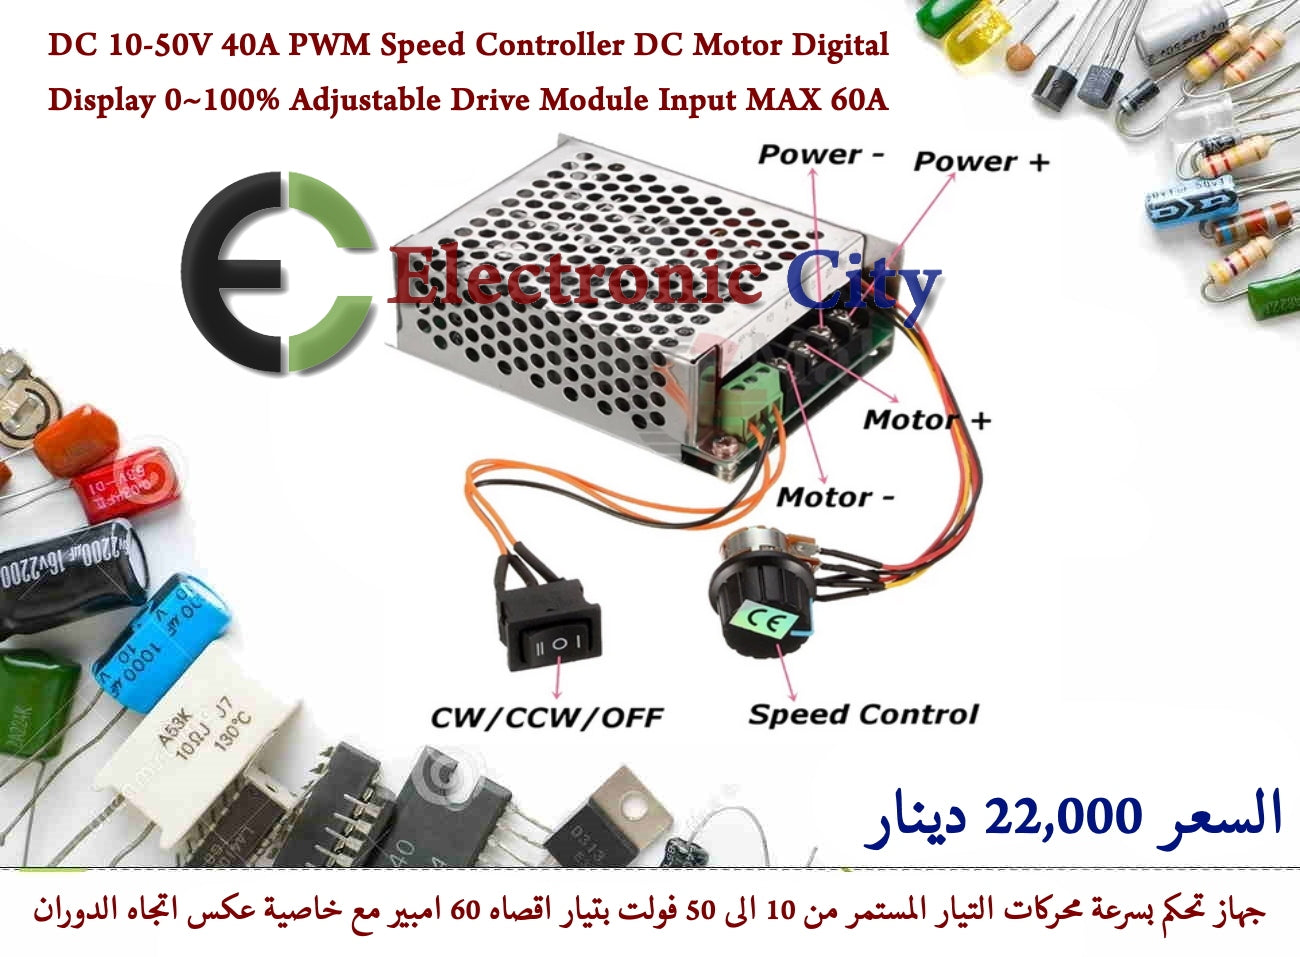 DC 10-50V 40A PWM Speed Controller DC Motor Digital Display 0~100% Adjustable Drive Module Input MAX 60A